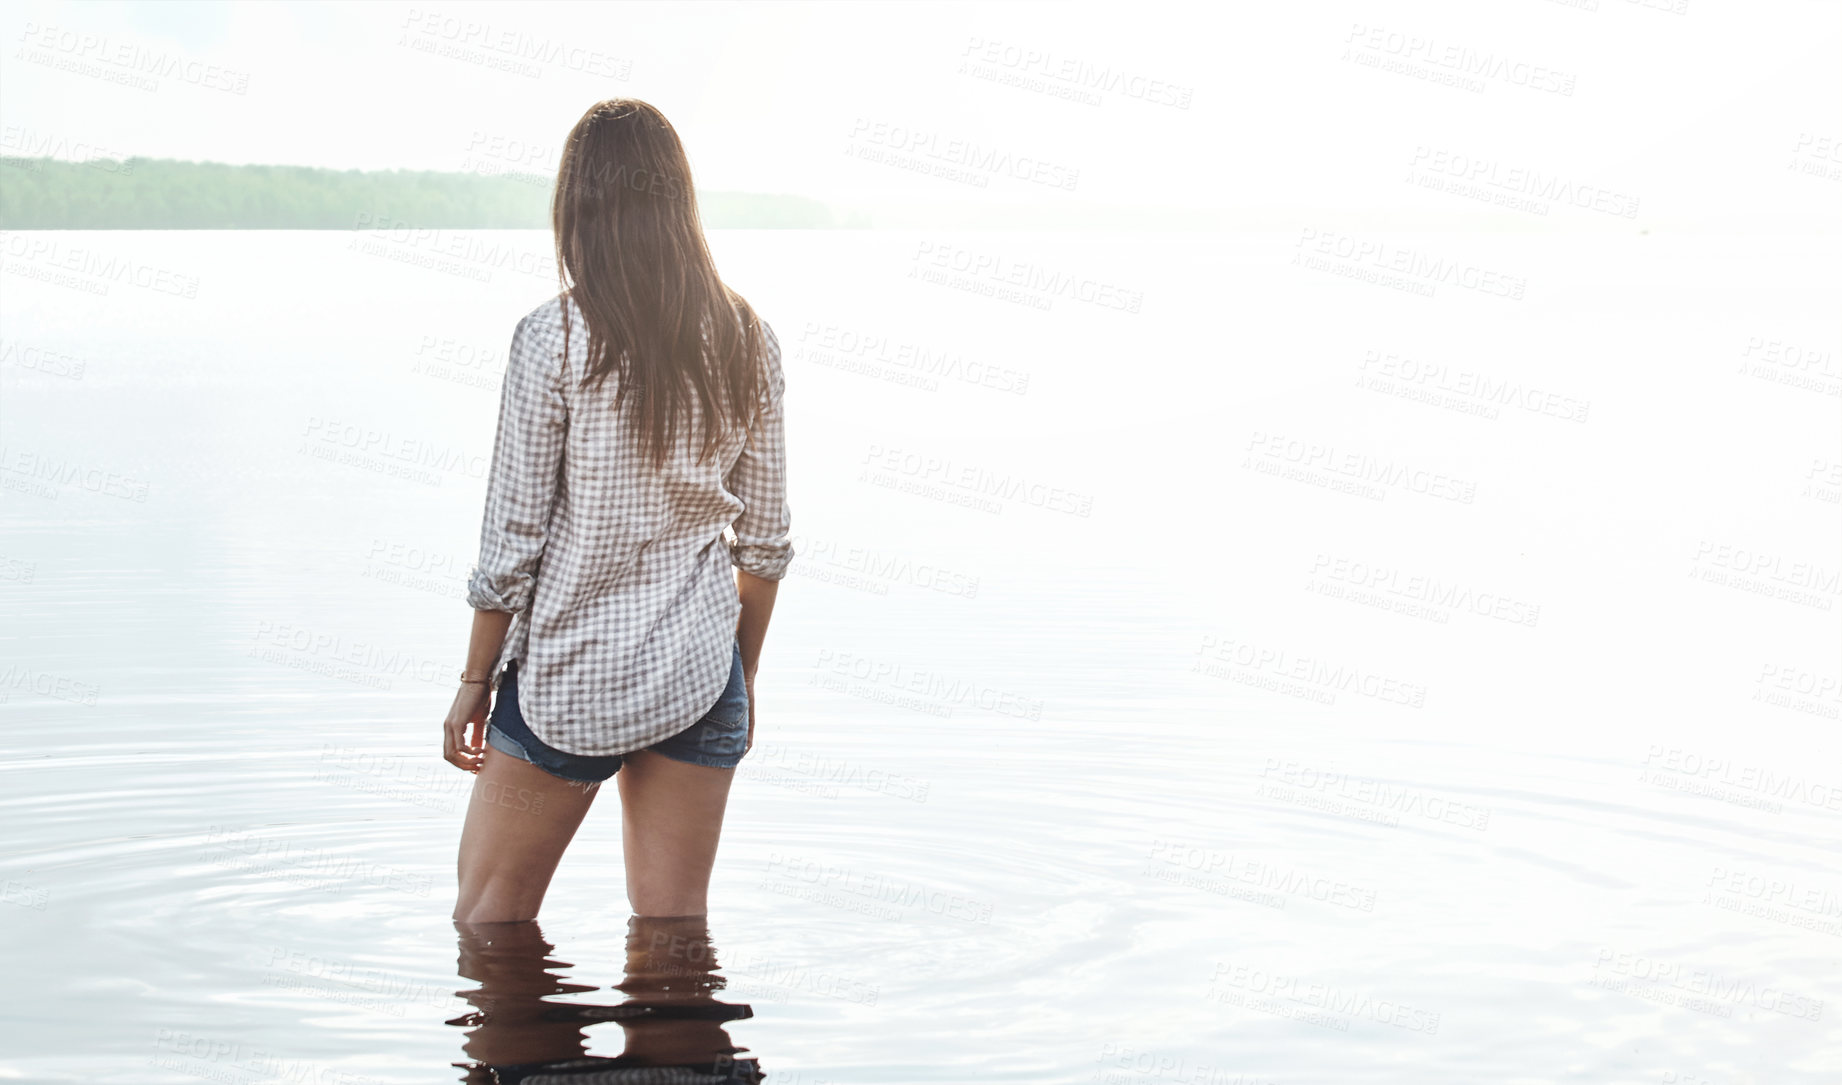 Buy stock photo Rearview shot of a young woman standing in a lake